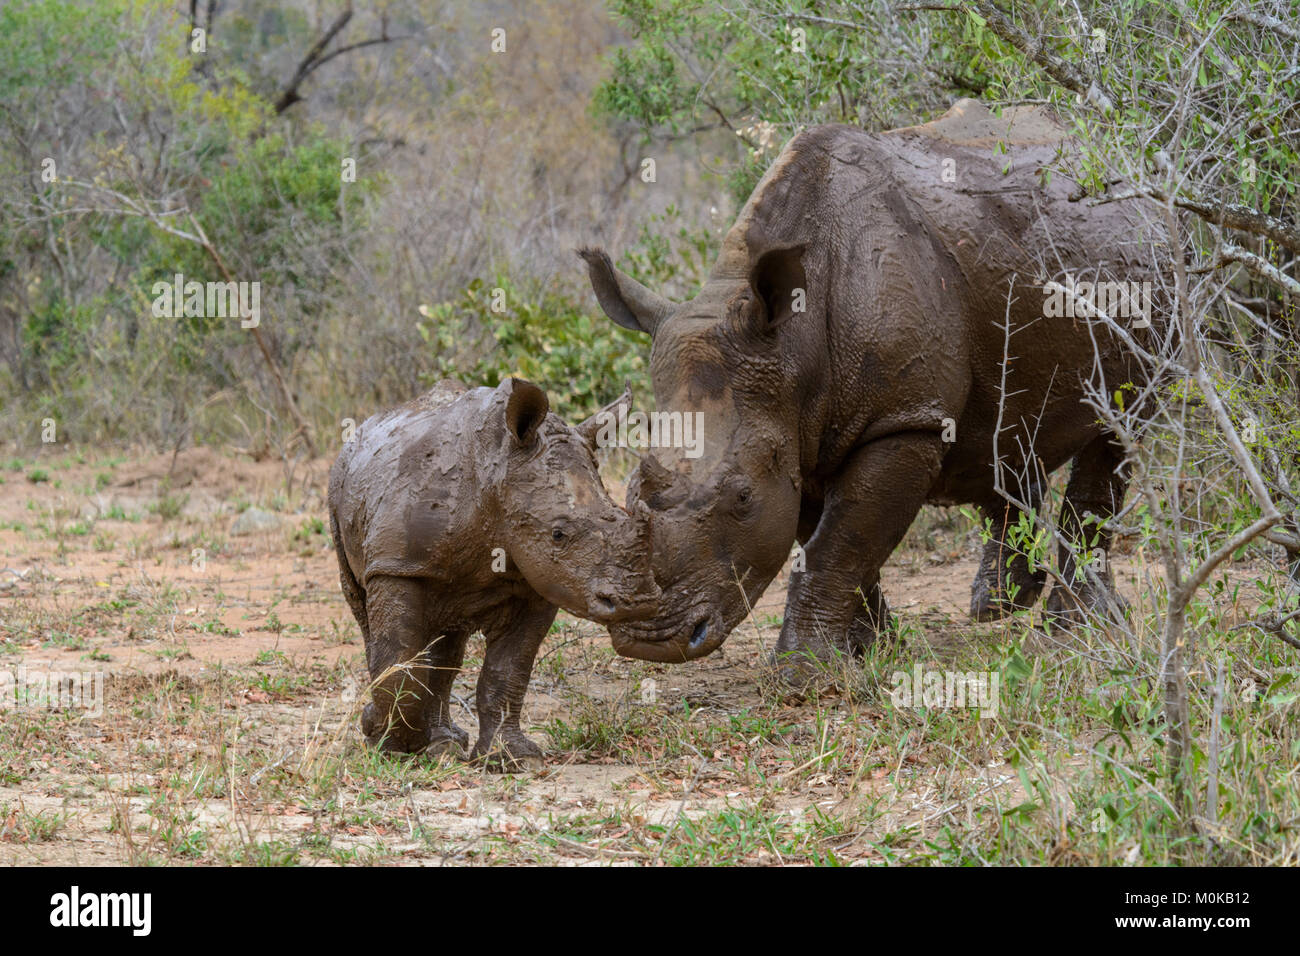 White rhinoceros mother and baby (Ceratotherium simum) covered in mud following a mud bath in Kruger National Park, South Africa Stock Photo